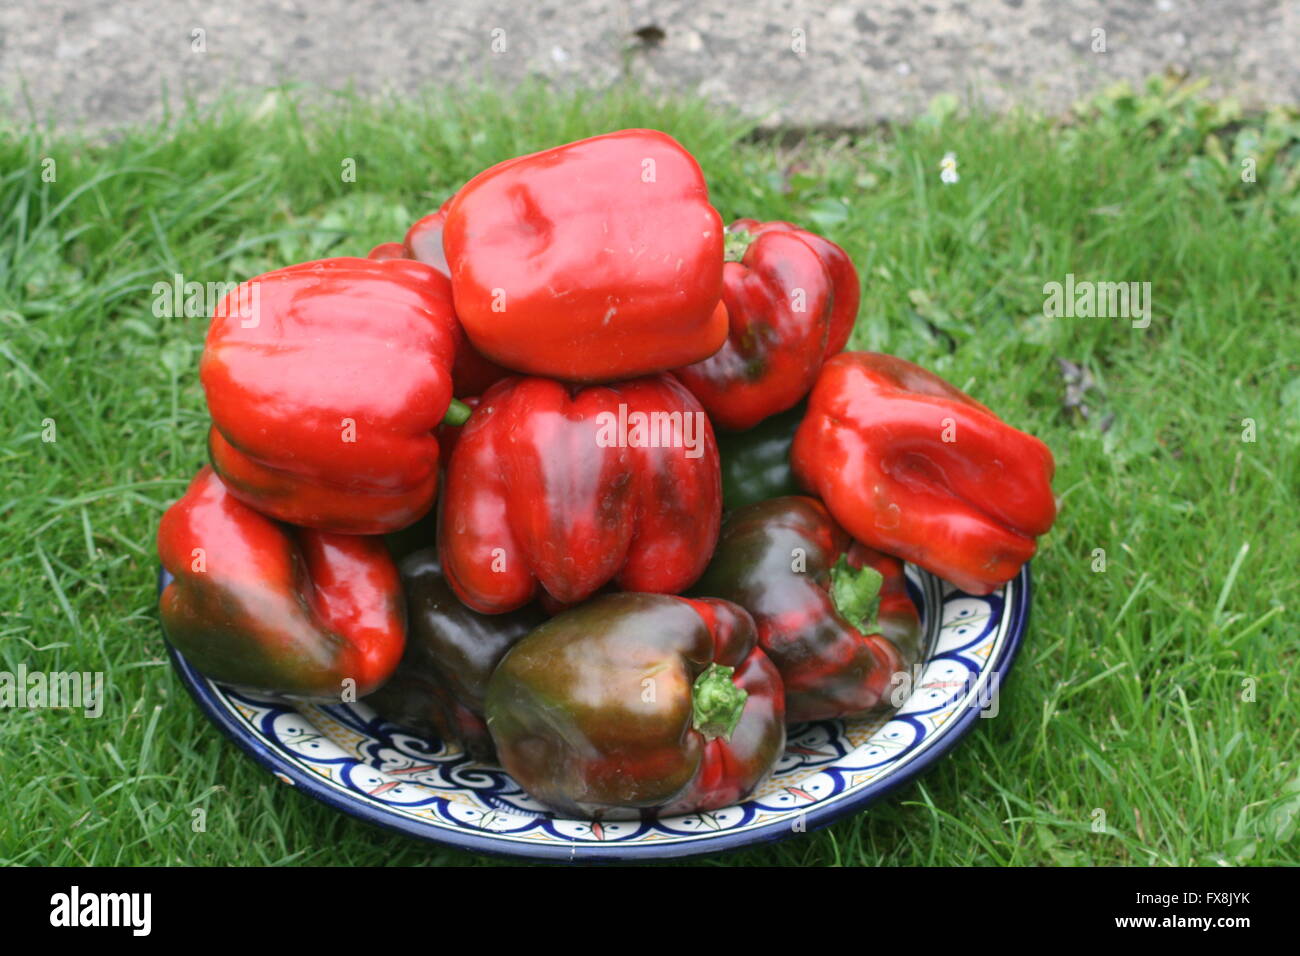 A wonderful crop of bell peppers Stock Photo